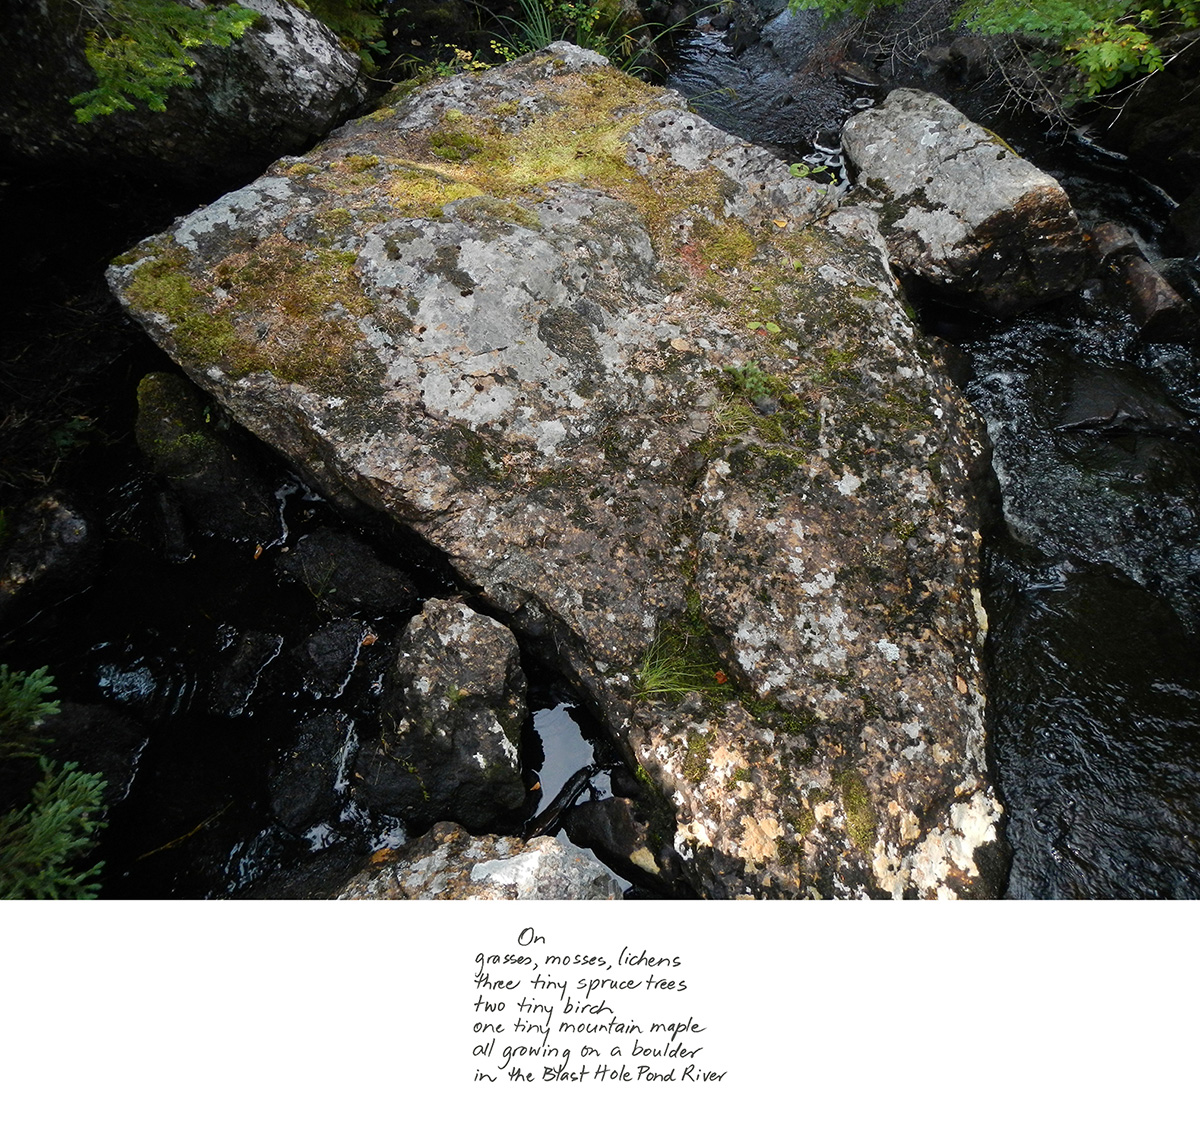 excerpt from On the Large Boulder in the Blast Hole Pond River, Summer 2020